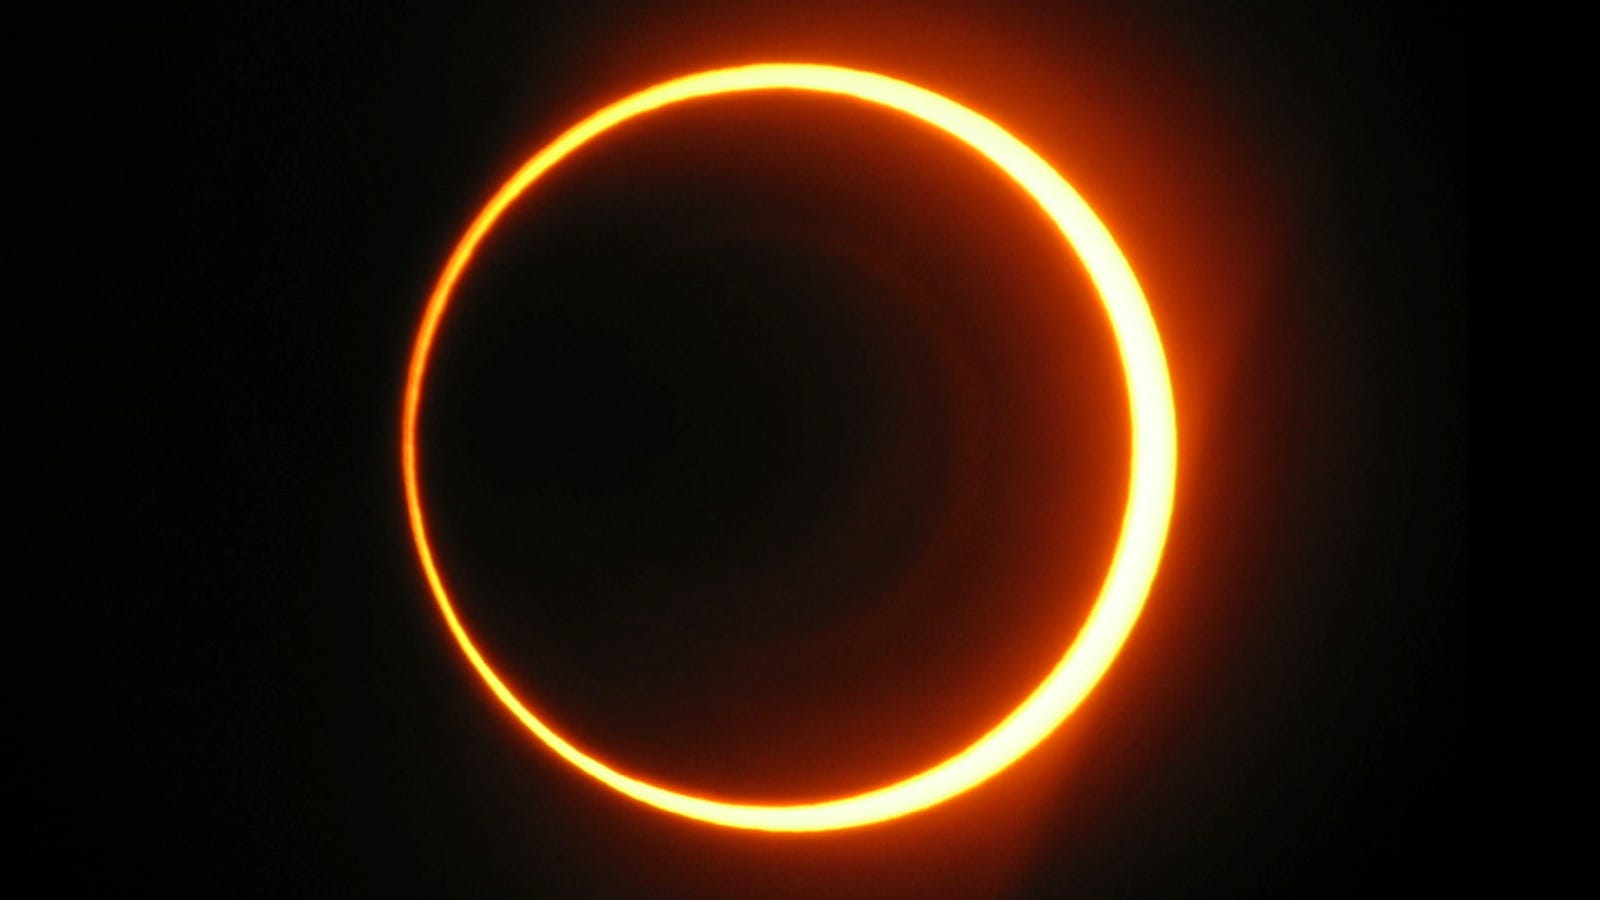 Everything you need to know to catch Sunday's rare "ring of fire" eclipse